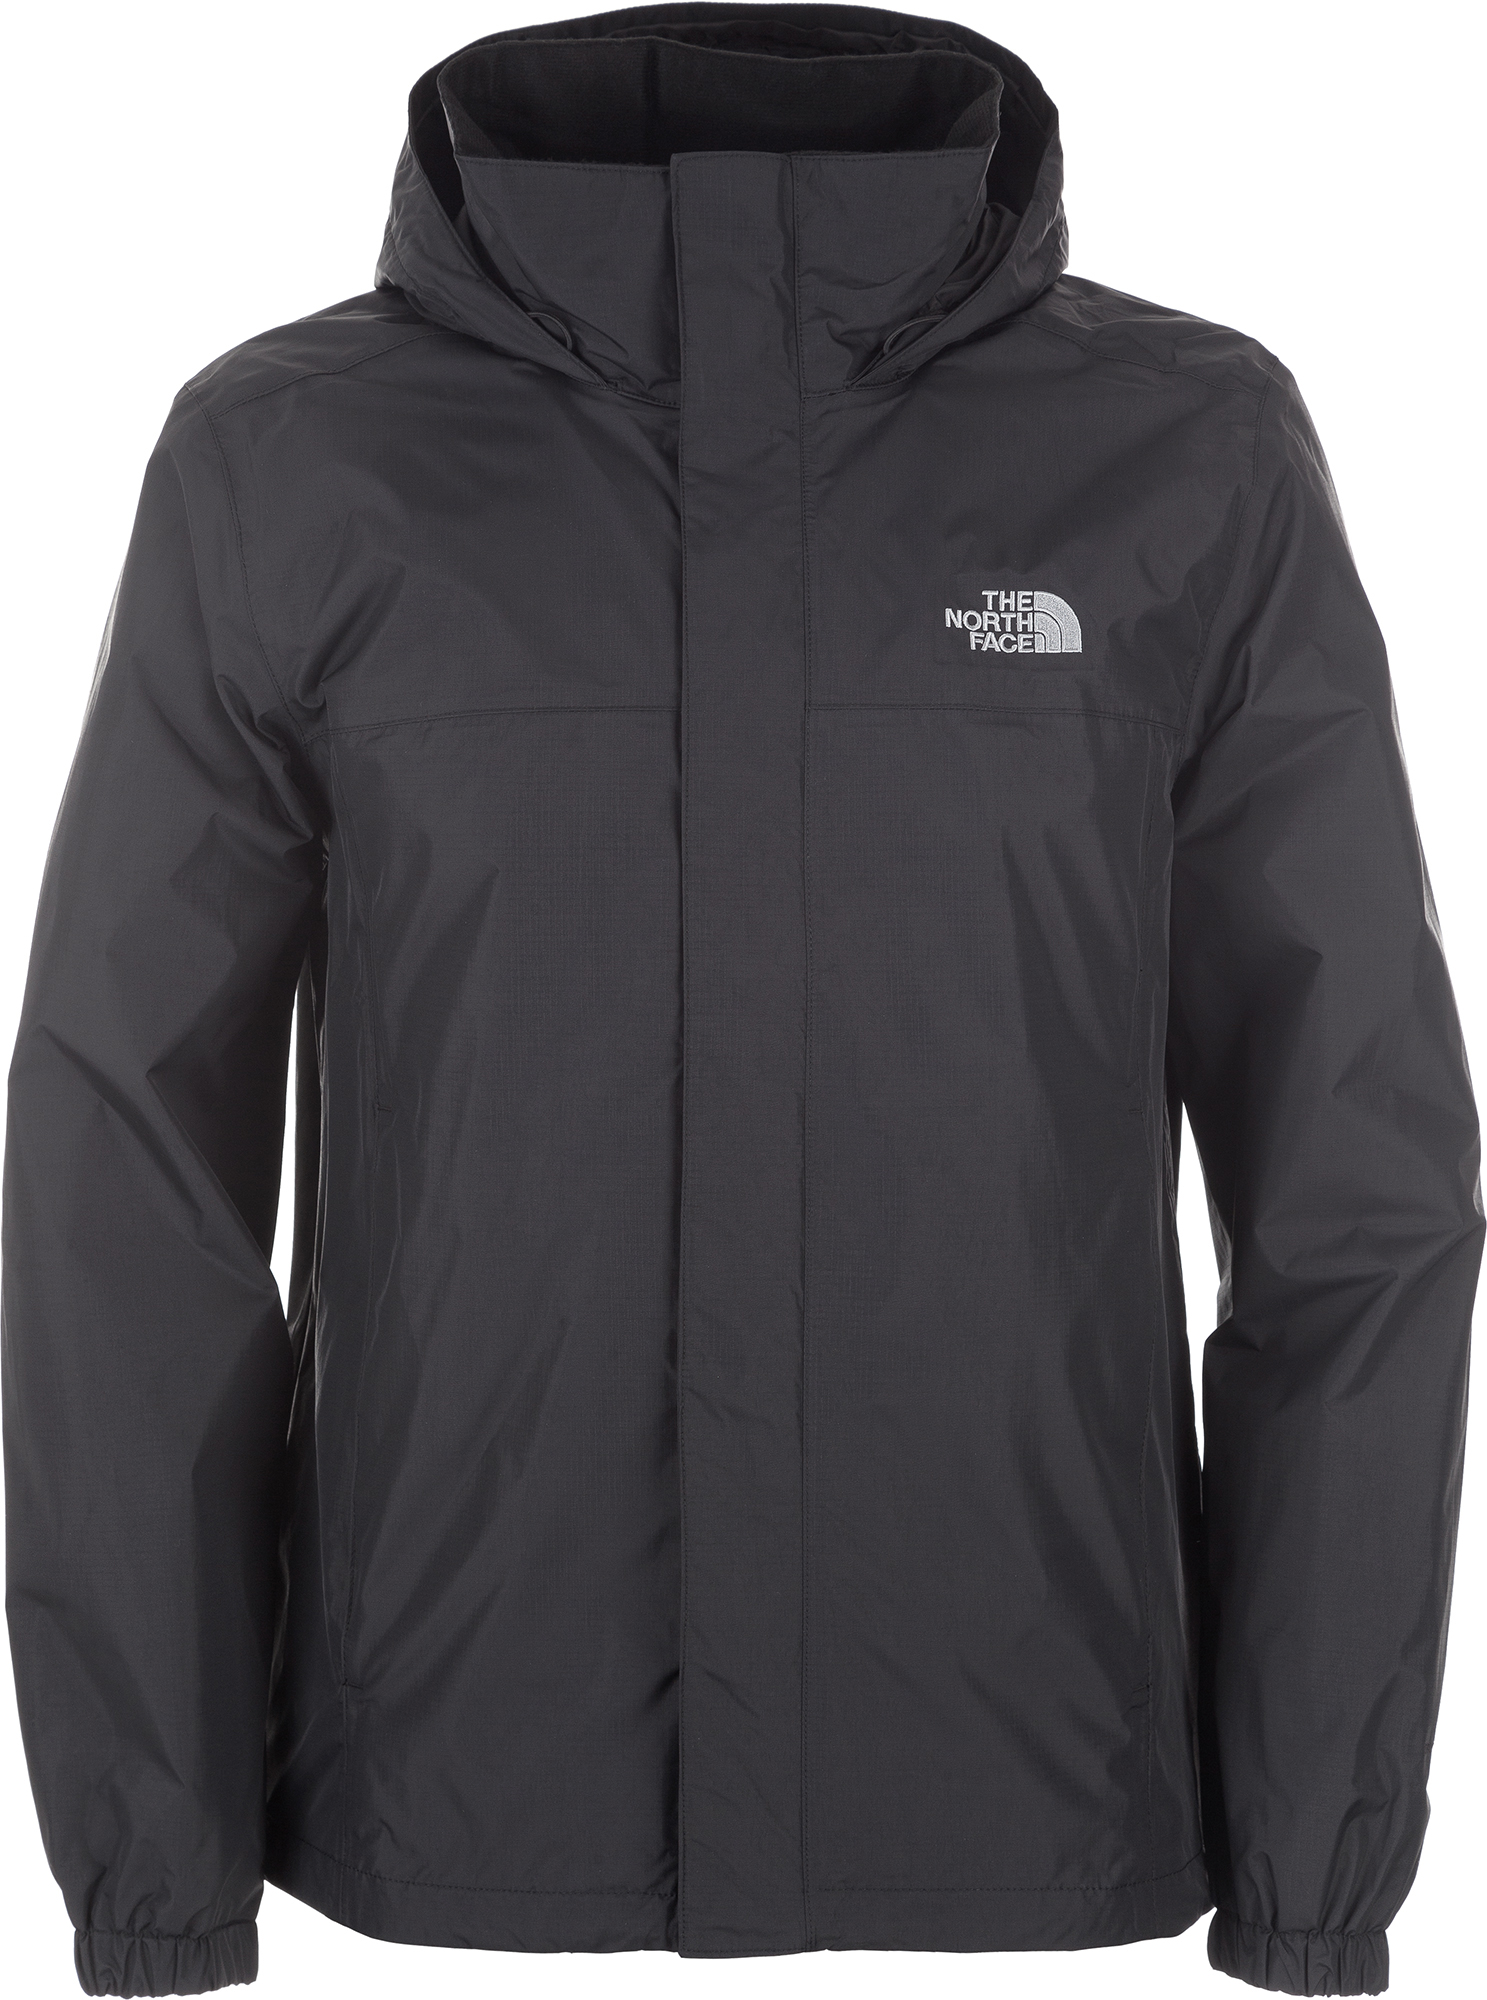 The North Face Ветровка мужская The North Face Resolve 2, размер 52